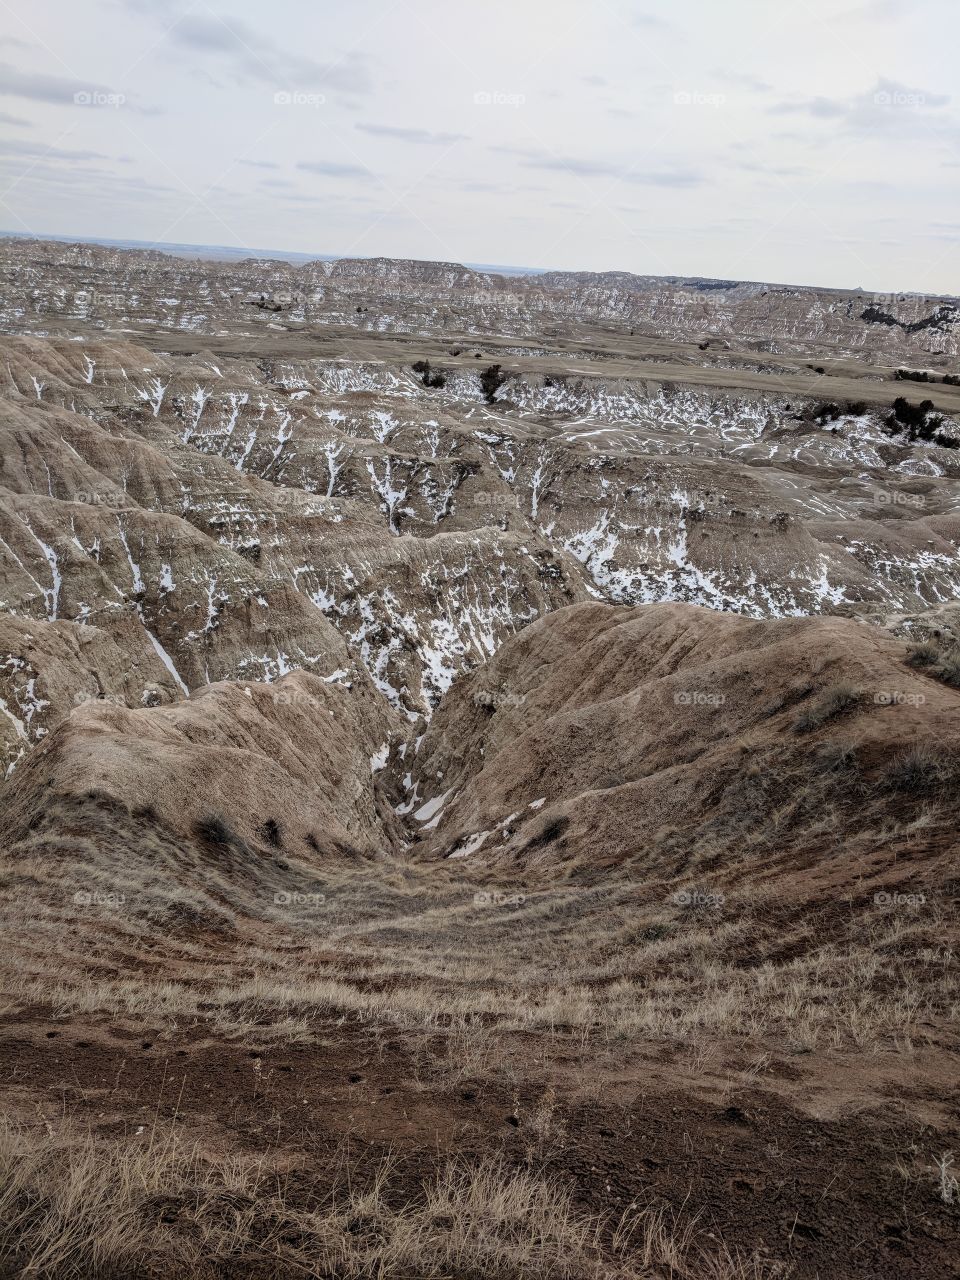 Badlands, South Dakota. Snow still showing in the hills and valleys. Beautiful day in early April.